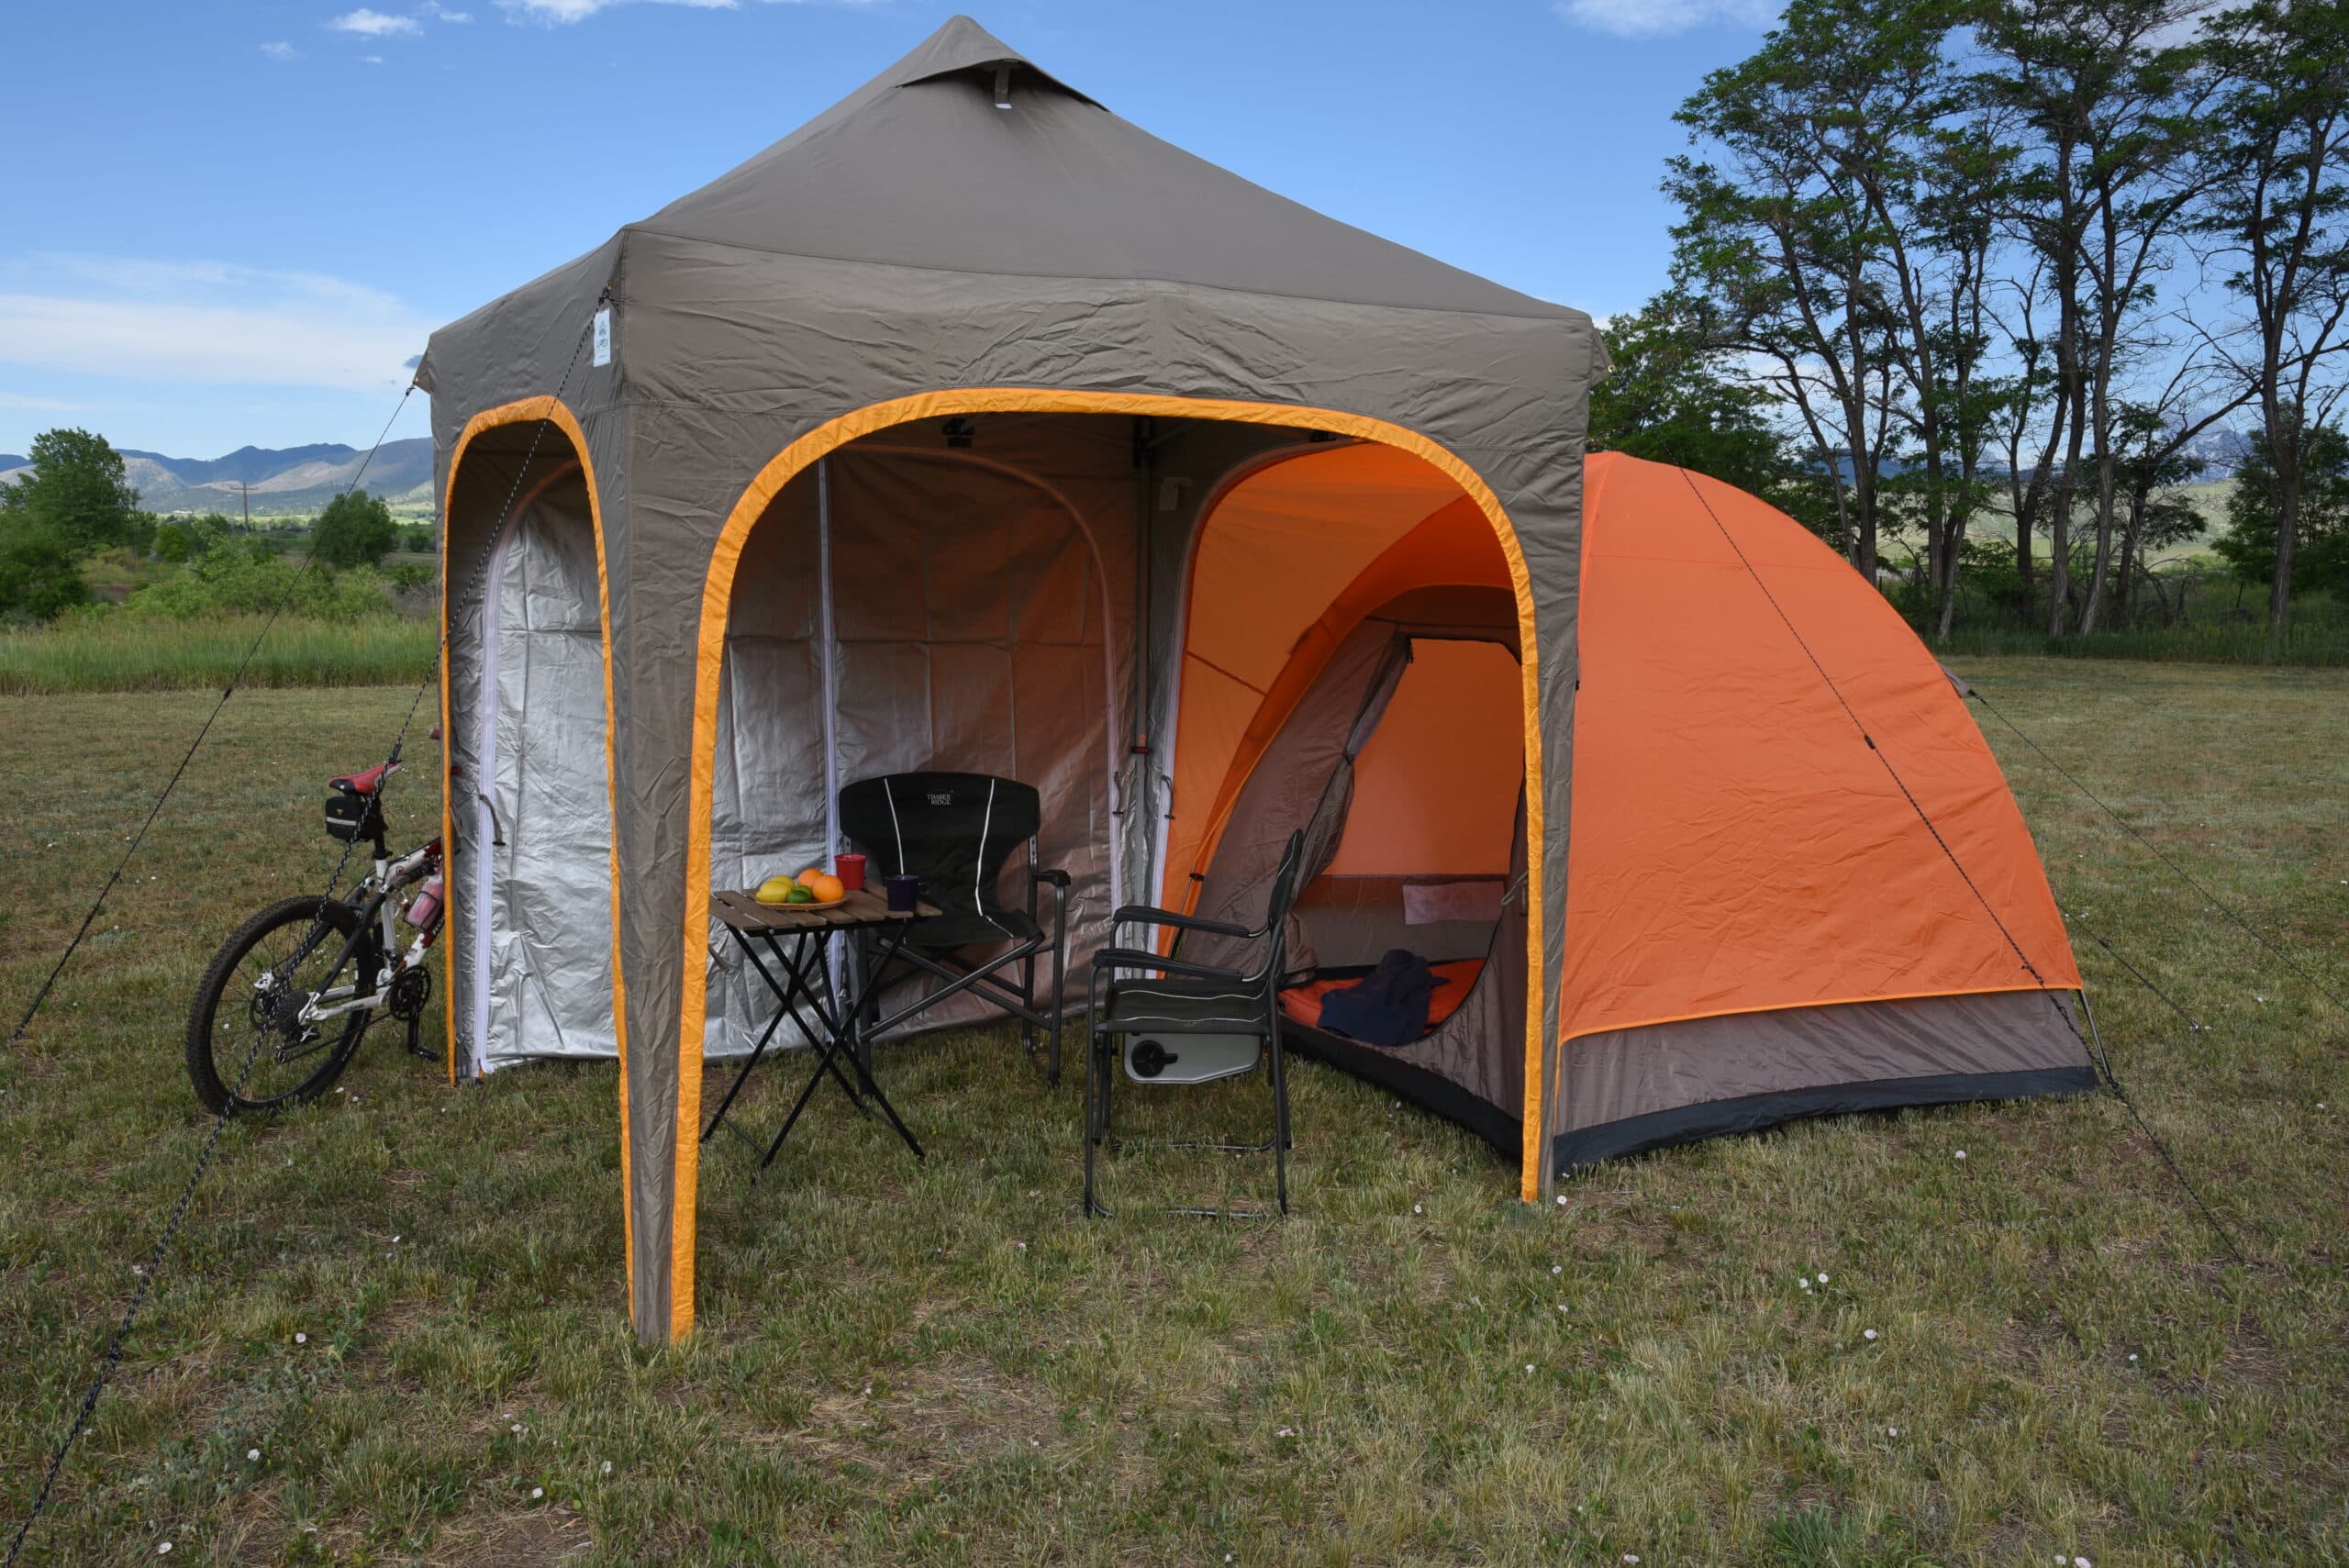 APEX-CAMP Canopy Tent Kit - UNDERCOVER POPUPSHADE